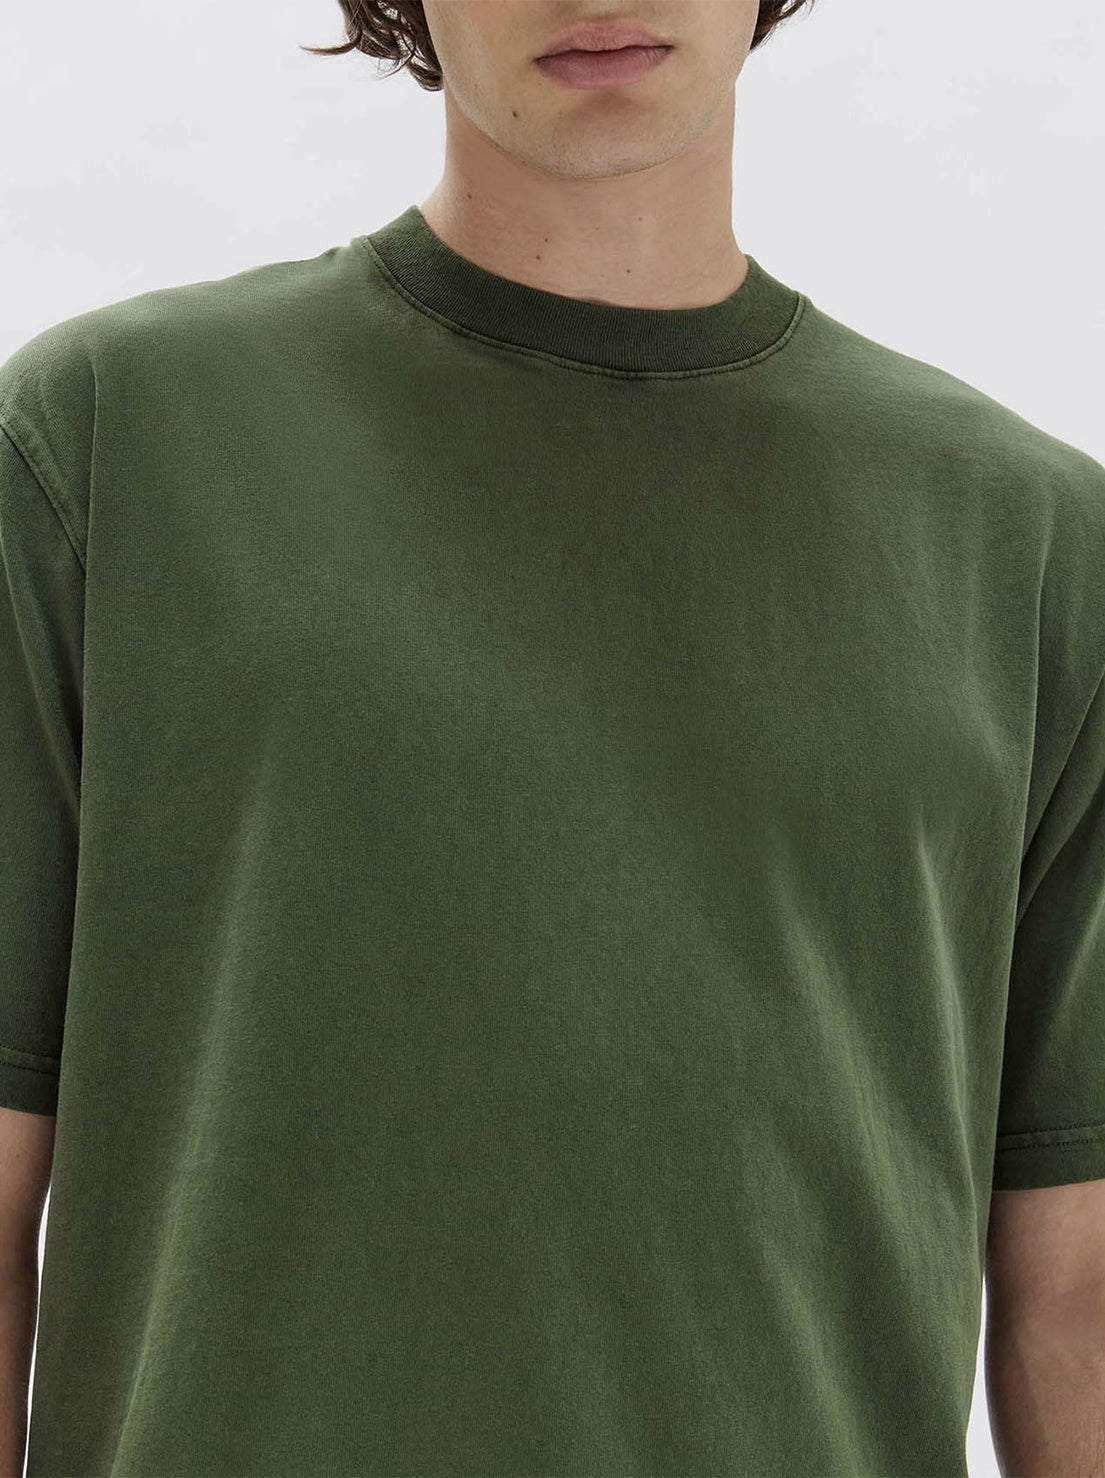 Assembly - Knox Organic Oversized Tee - Forest